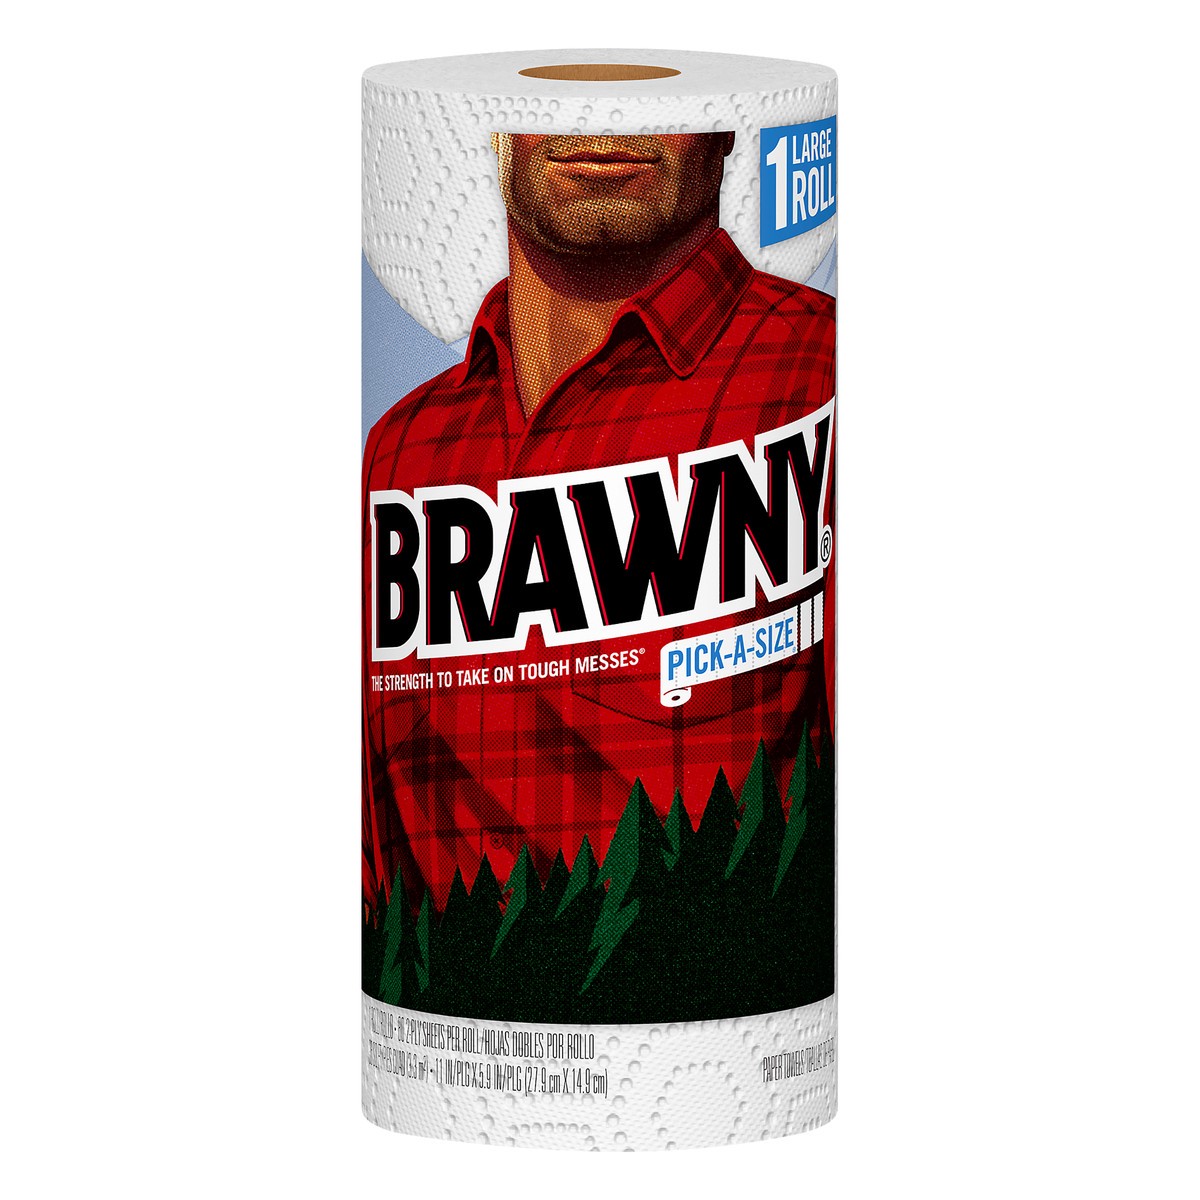 slide 3 of 5, Brawny Large Roll Pick-A-Size 2-Ply Paper Towels 1 ea, 1 ct